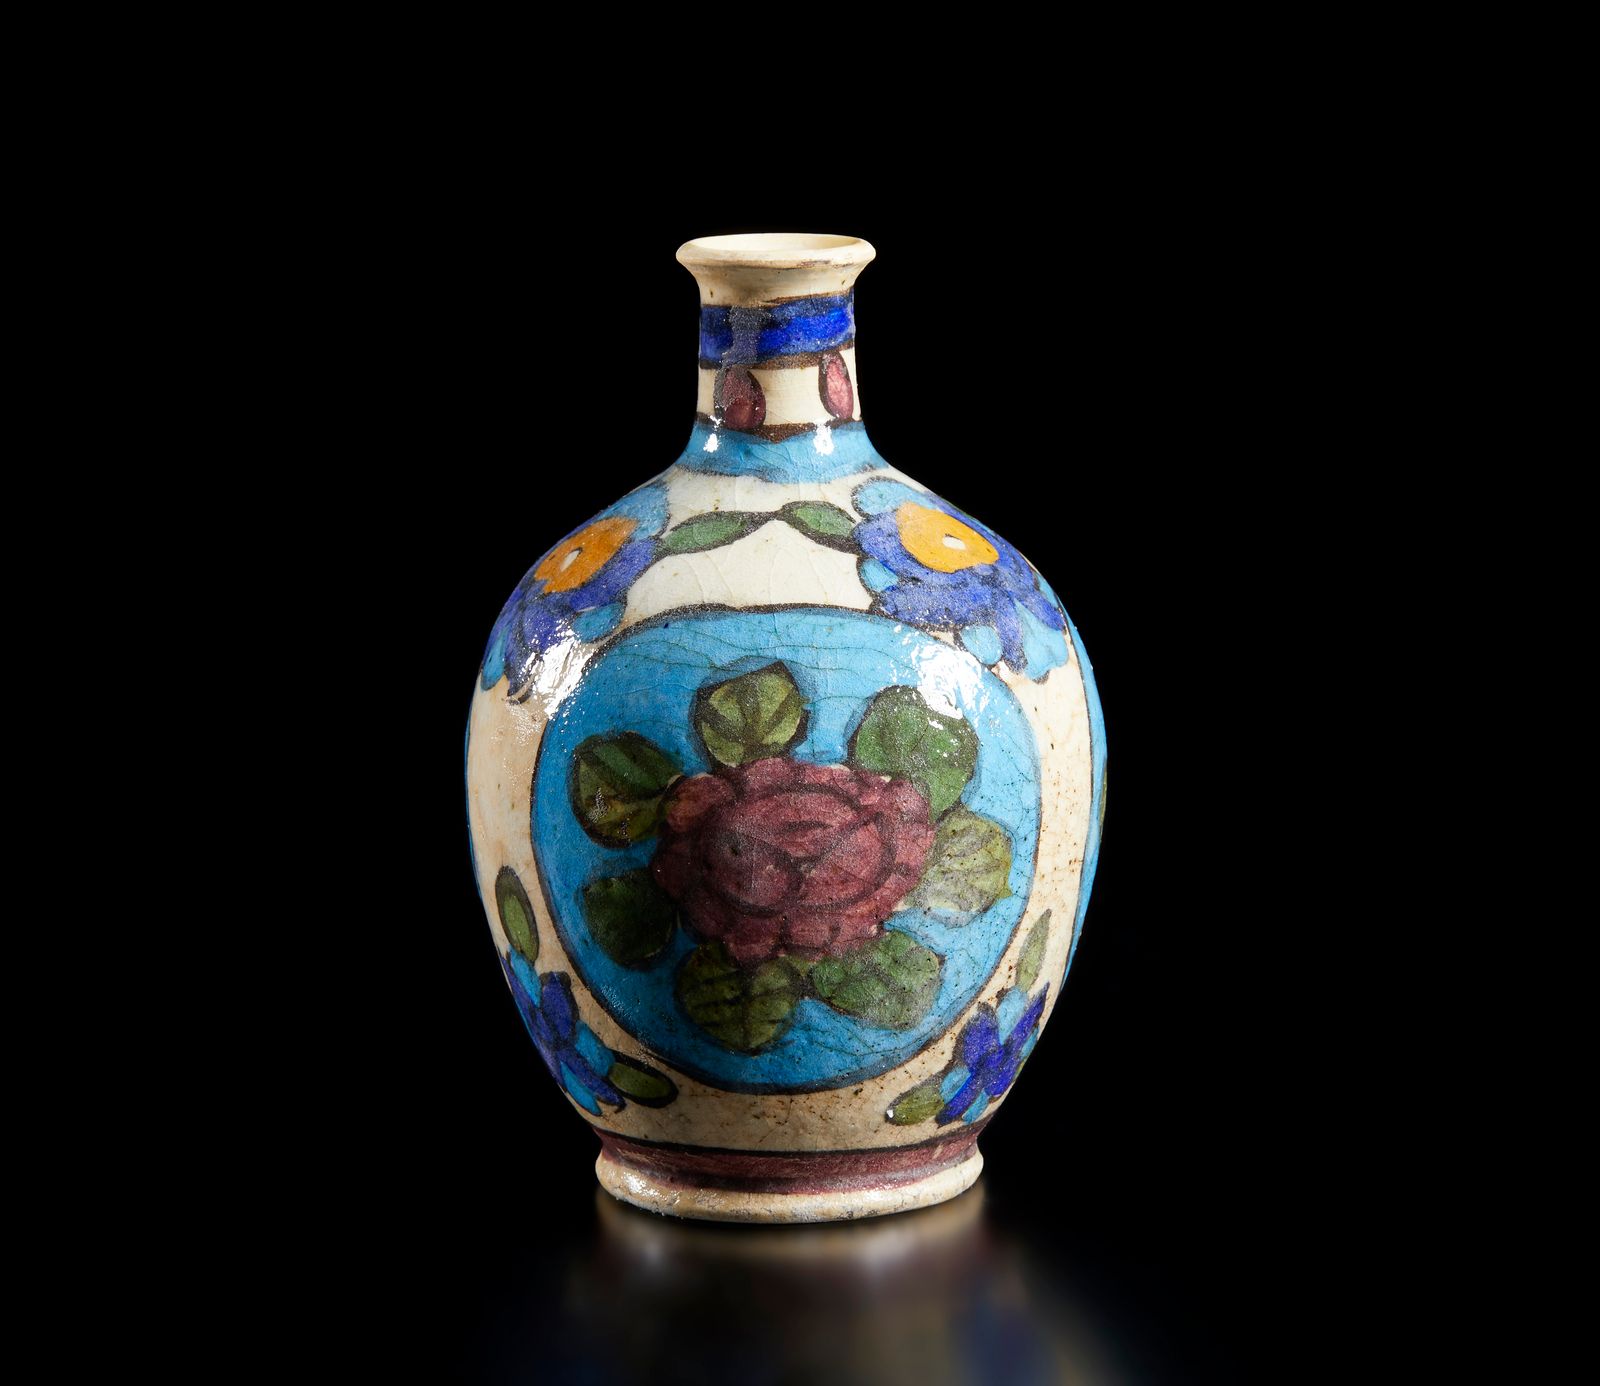 Islamic Art A pottery bottle vase painted with flowers Arte islamica. Vaso a bot&hellip;